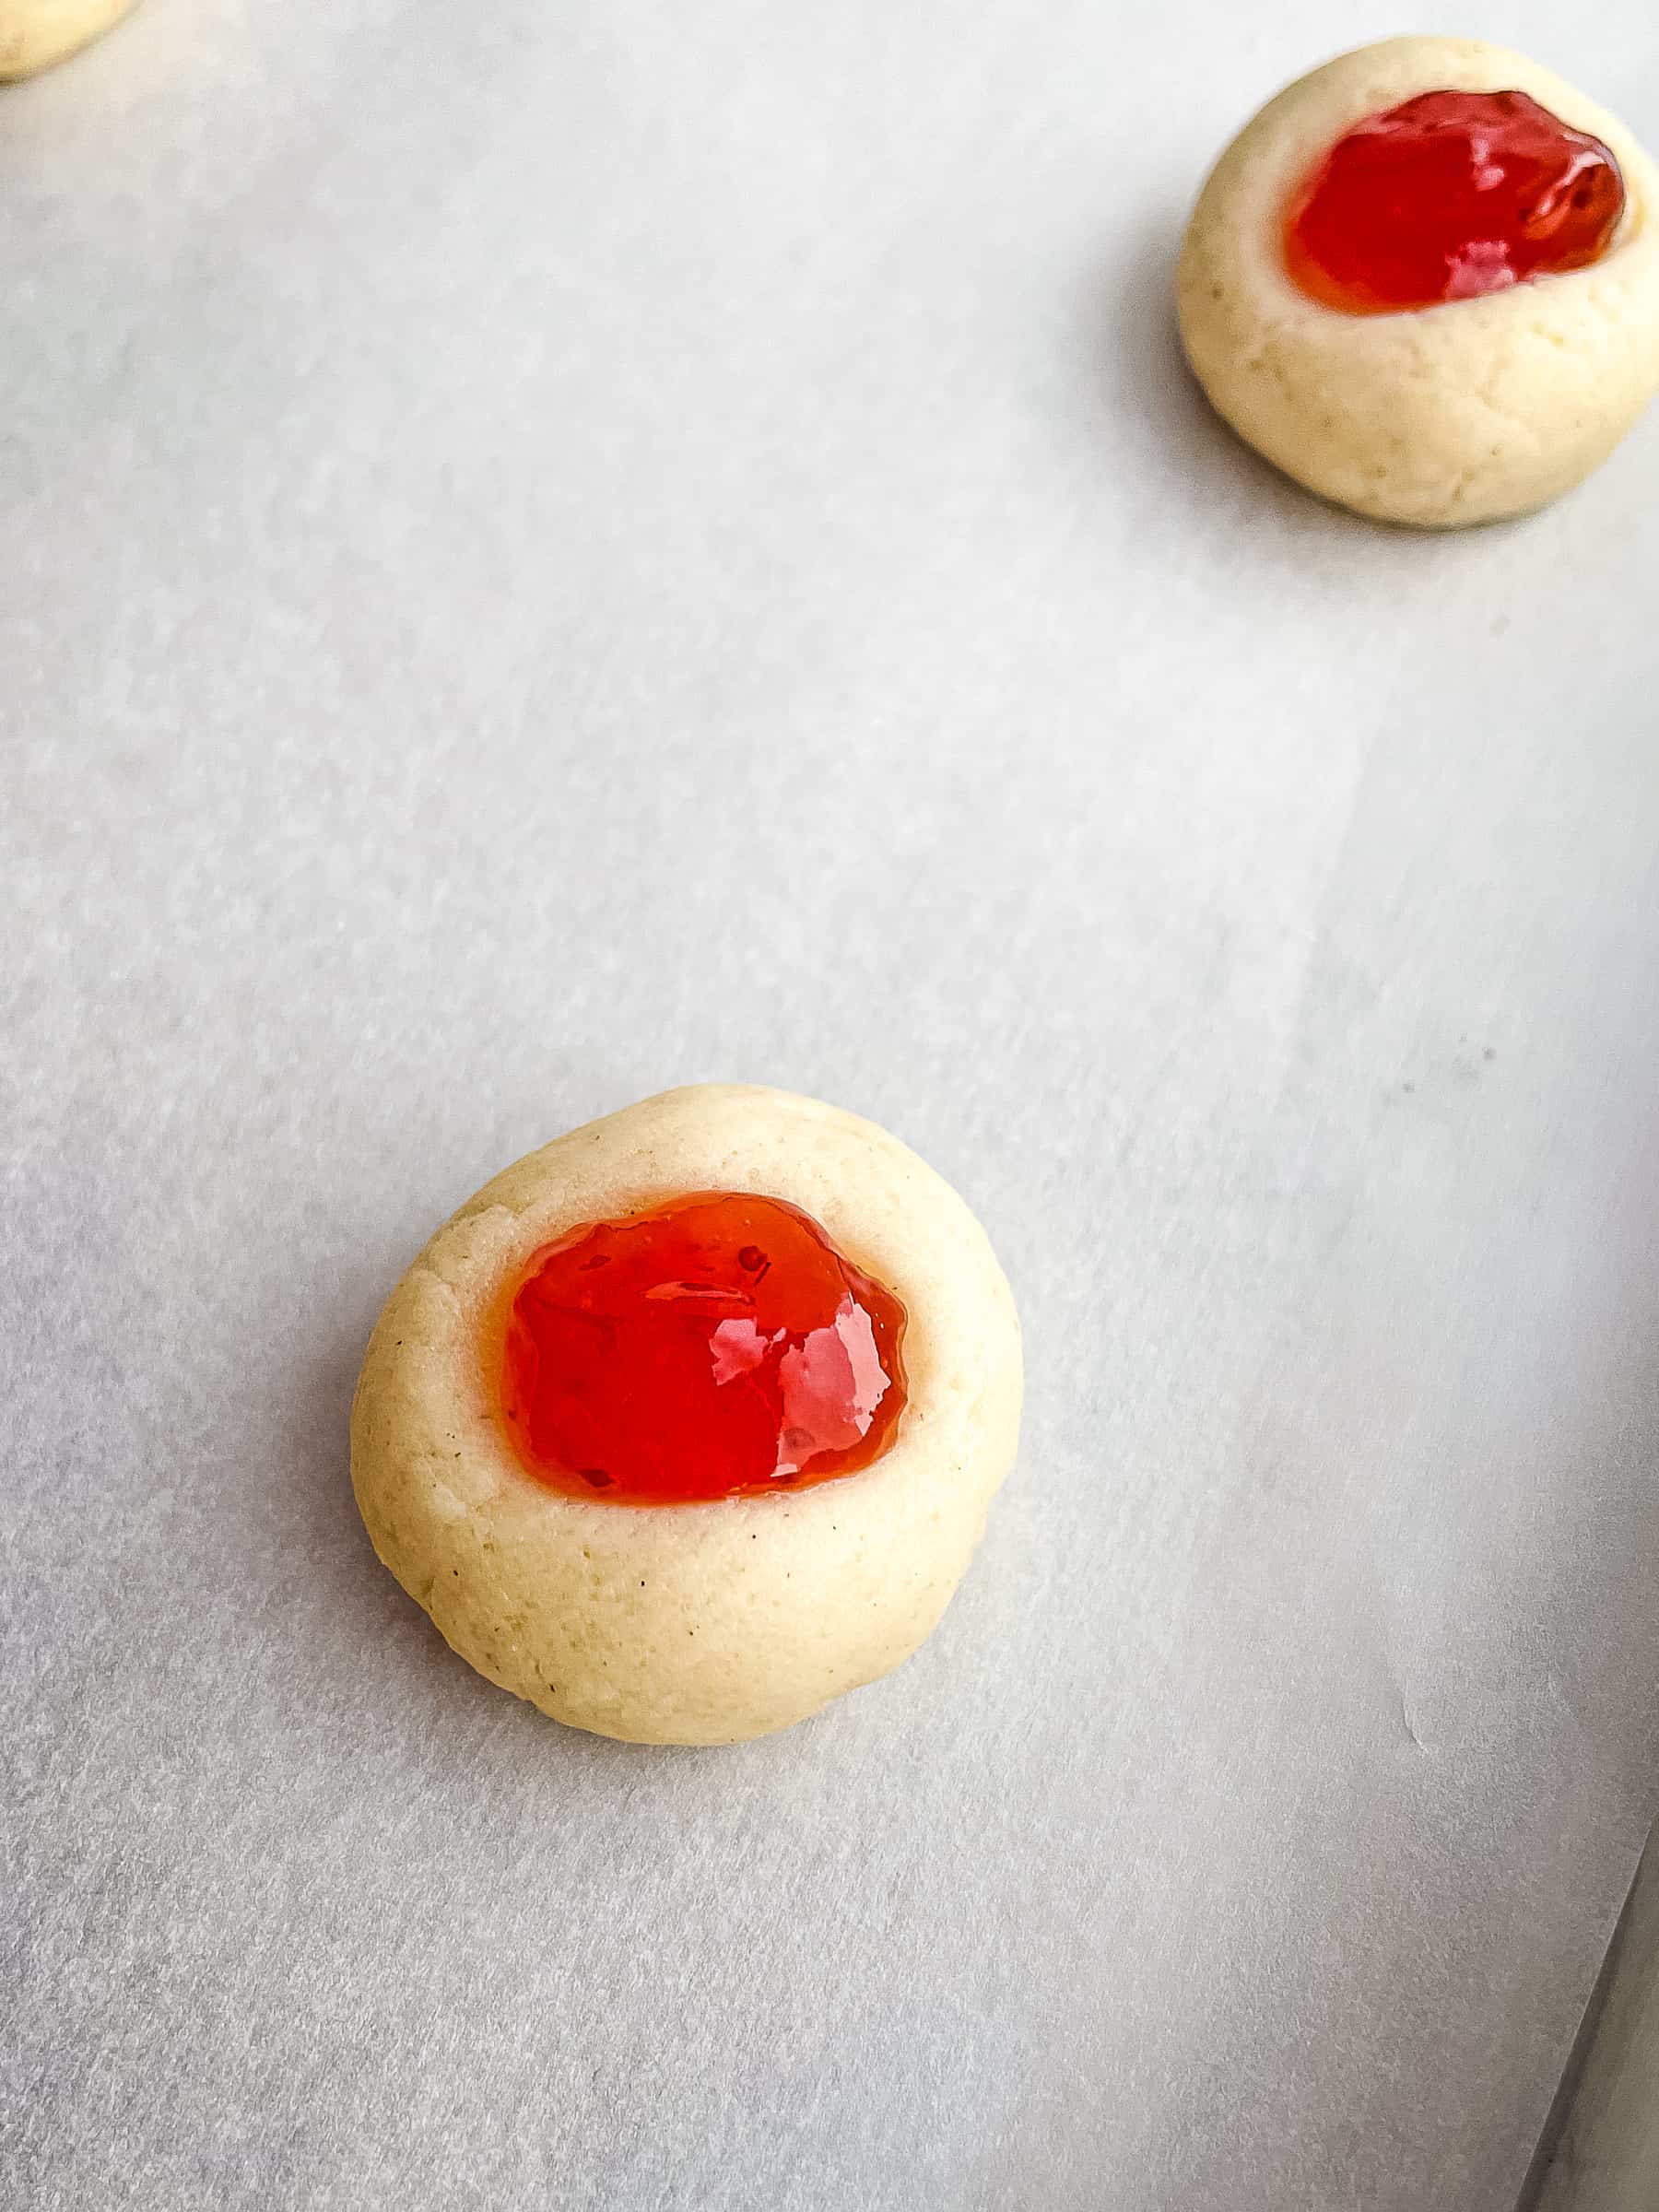 Unbaked gluten-free thumbprint cookies topped with strawberry jam on a baking sheet.